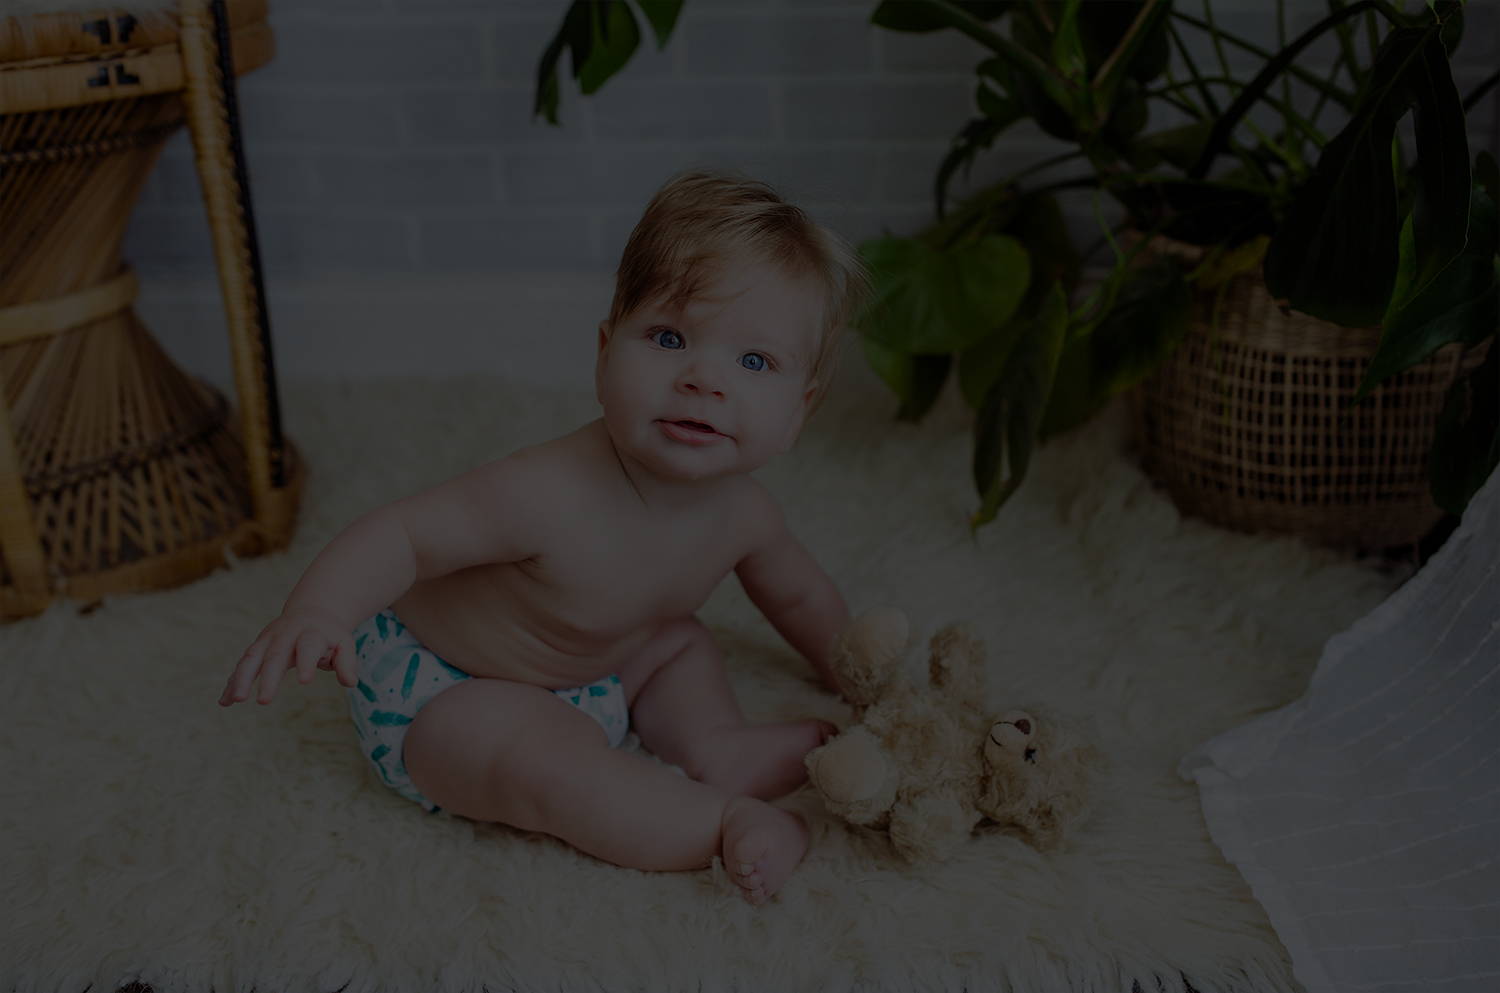 Baby sitting on a cozy fur rug looking right at the camera while holding a stuffed bear. Dressed in his simple being safari.